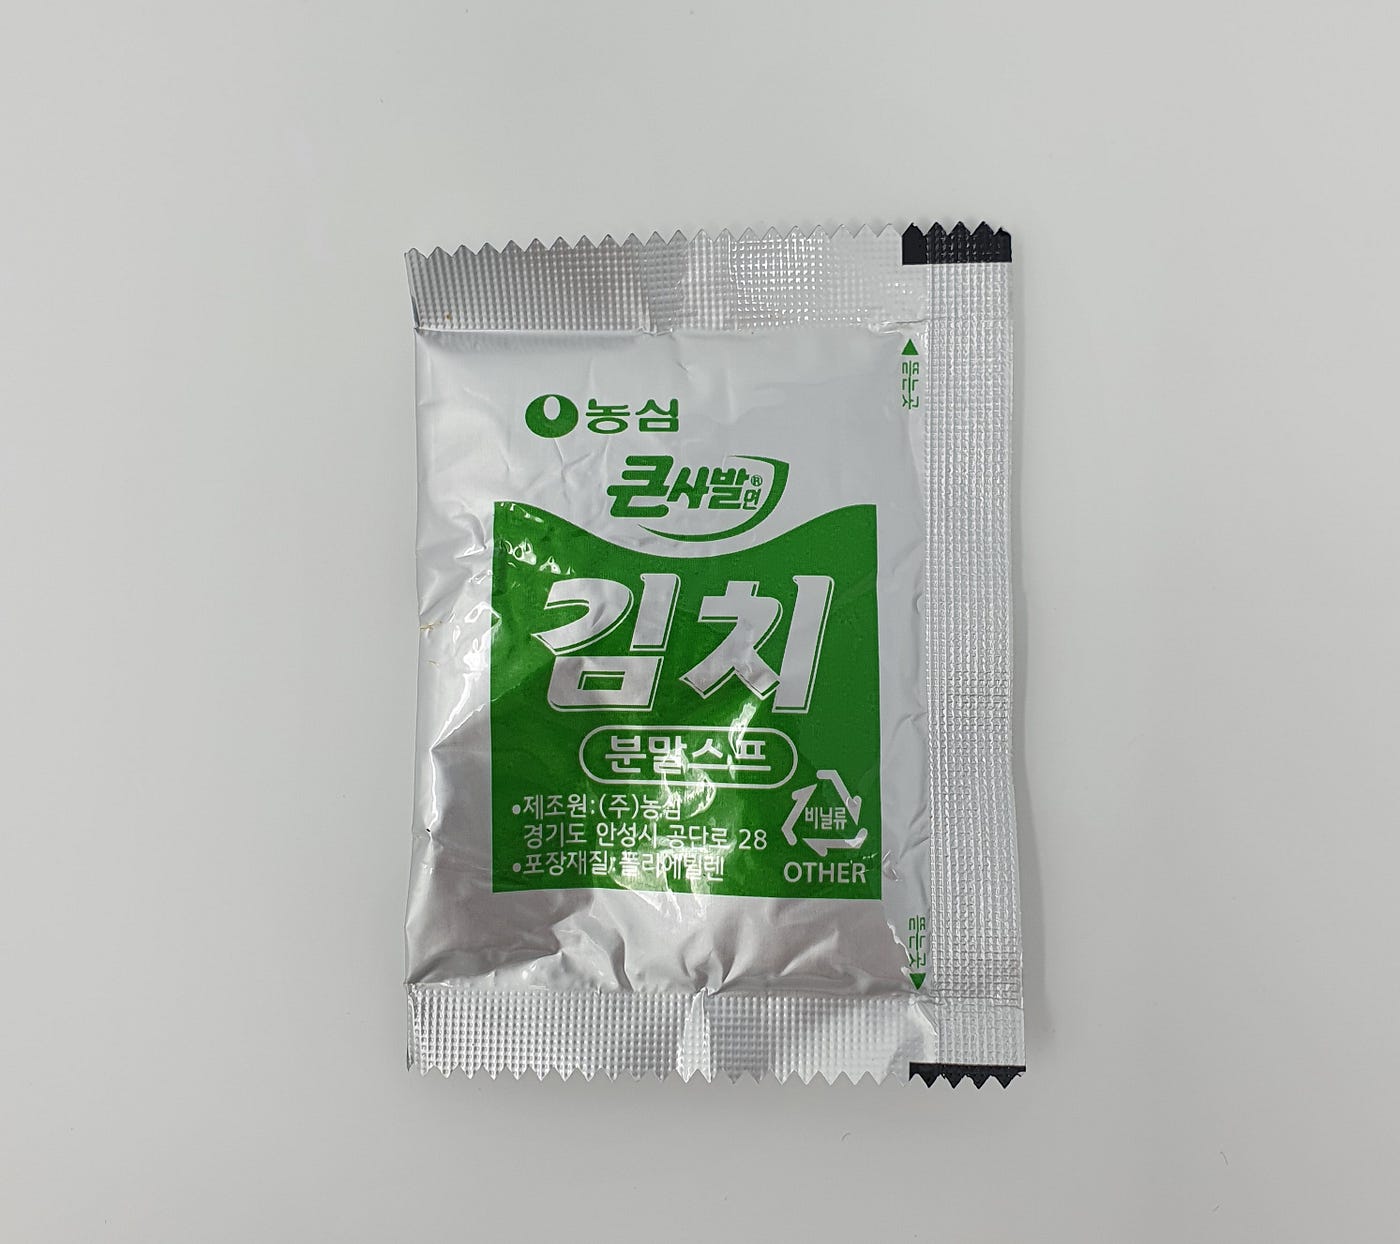 The packet of kimchi flavored powder for Nongshim’s Kimchi Instant Noodles.